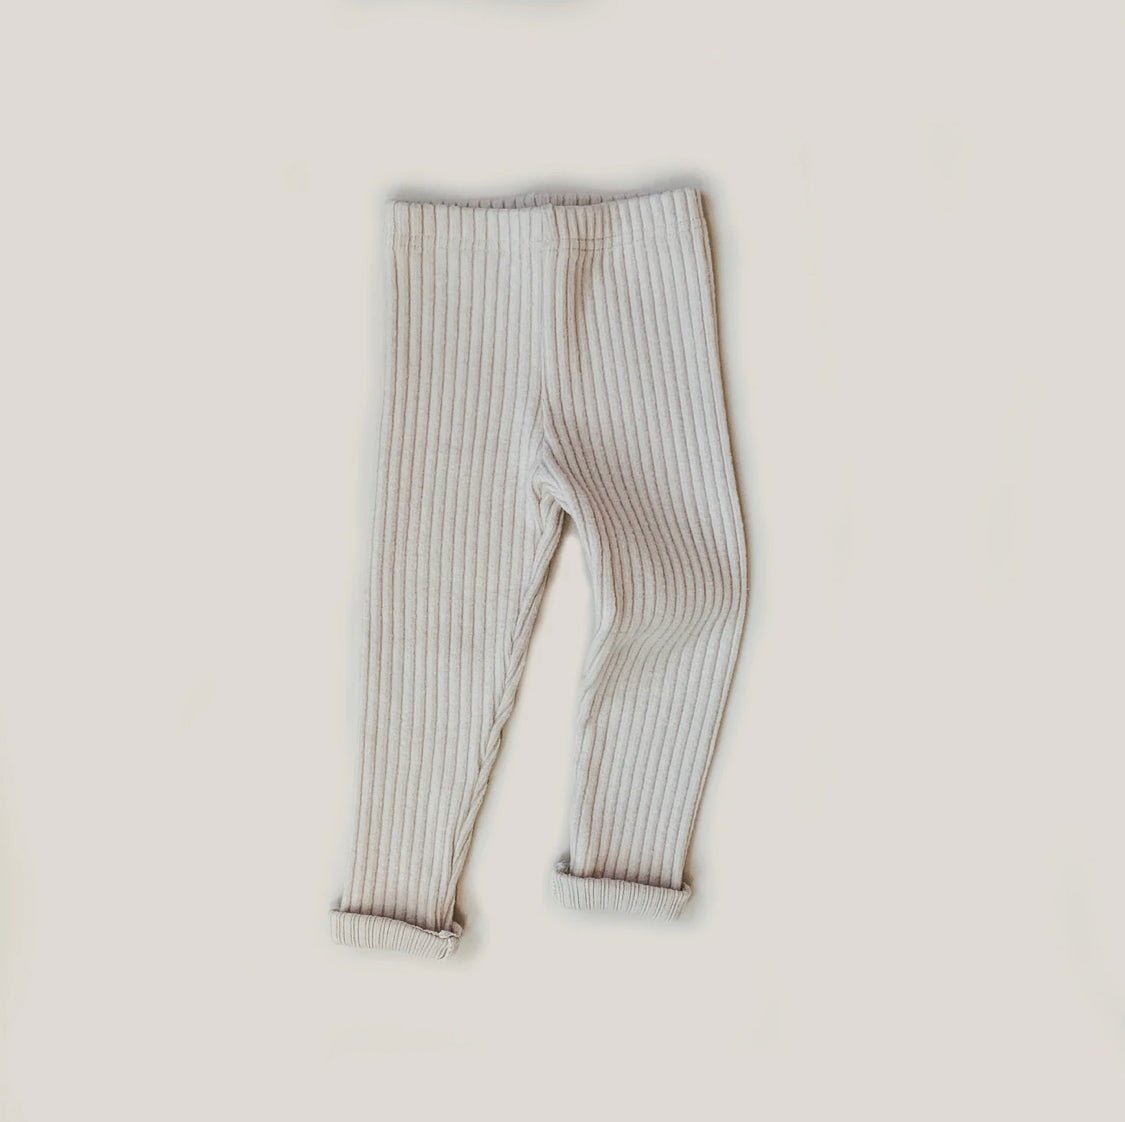 Tayo Rib Leggings find Stylish Fashion for Little People- at Little Foxx Concept Store